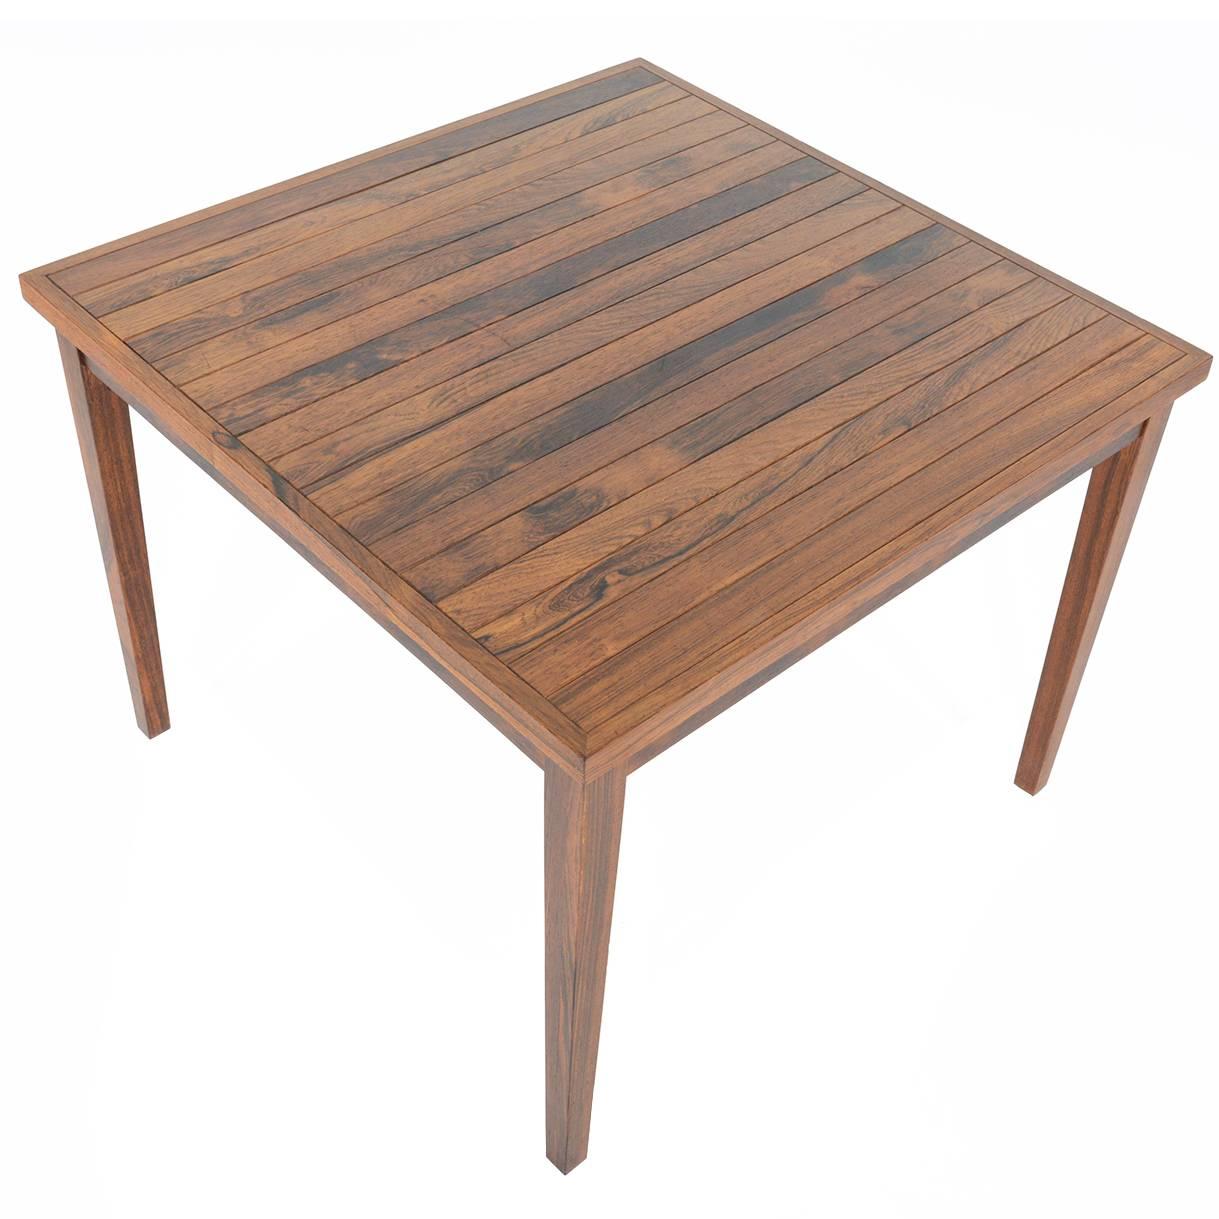 Danish Modern Slatted Square Rosewood Coffee Table